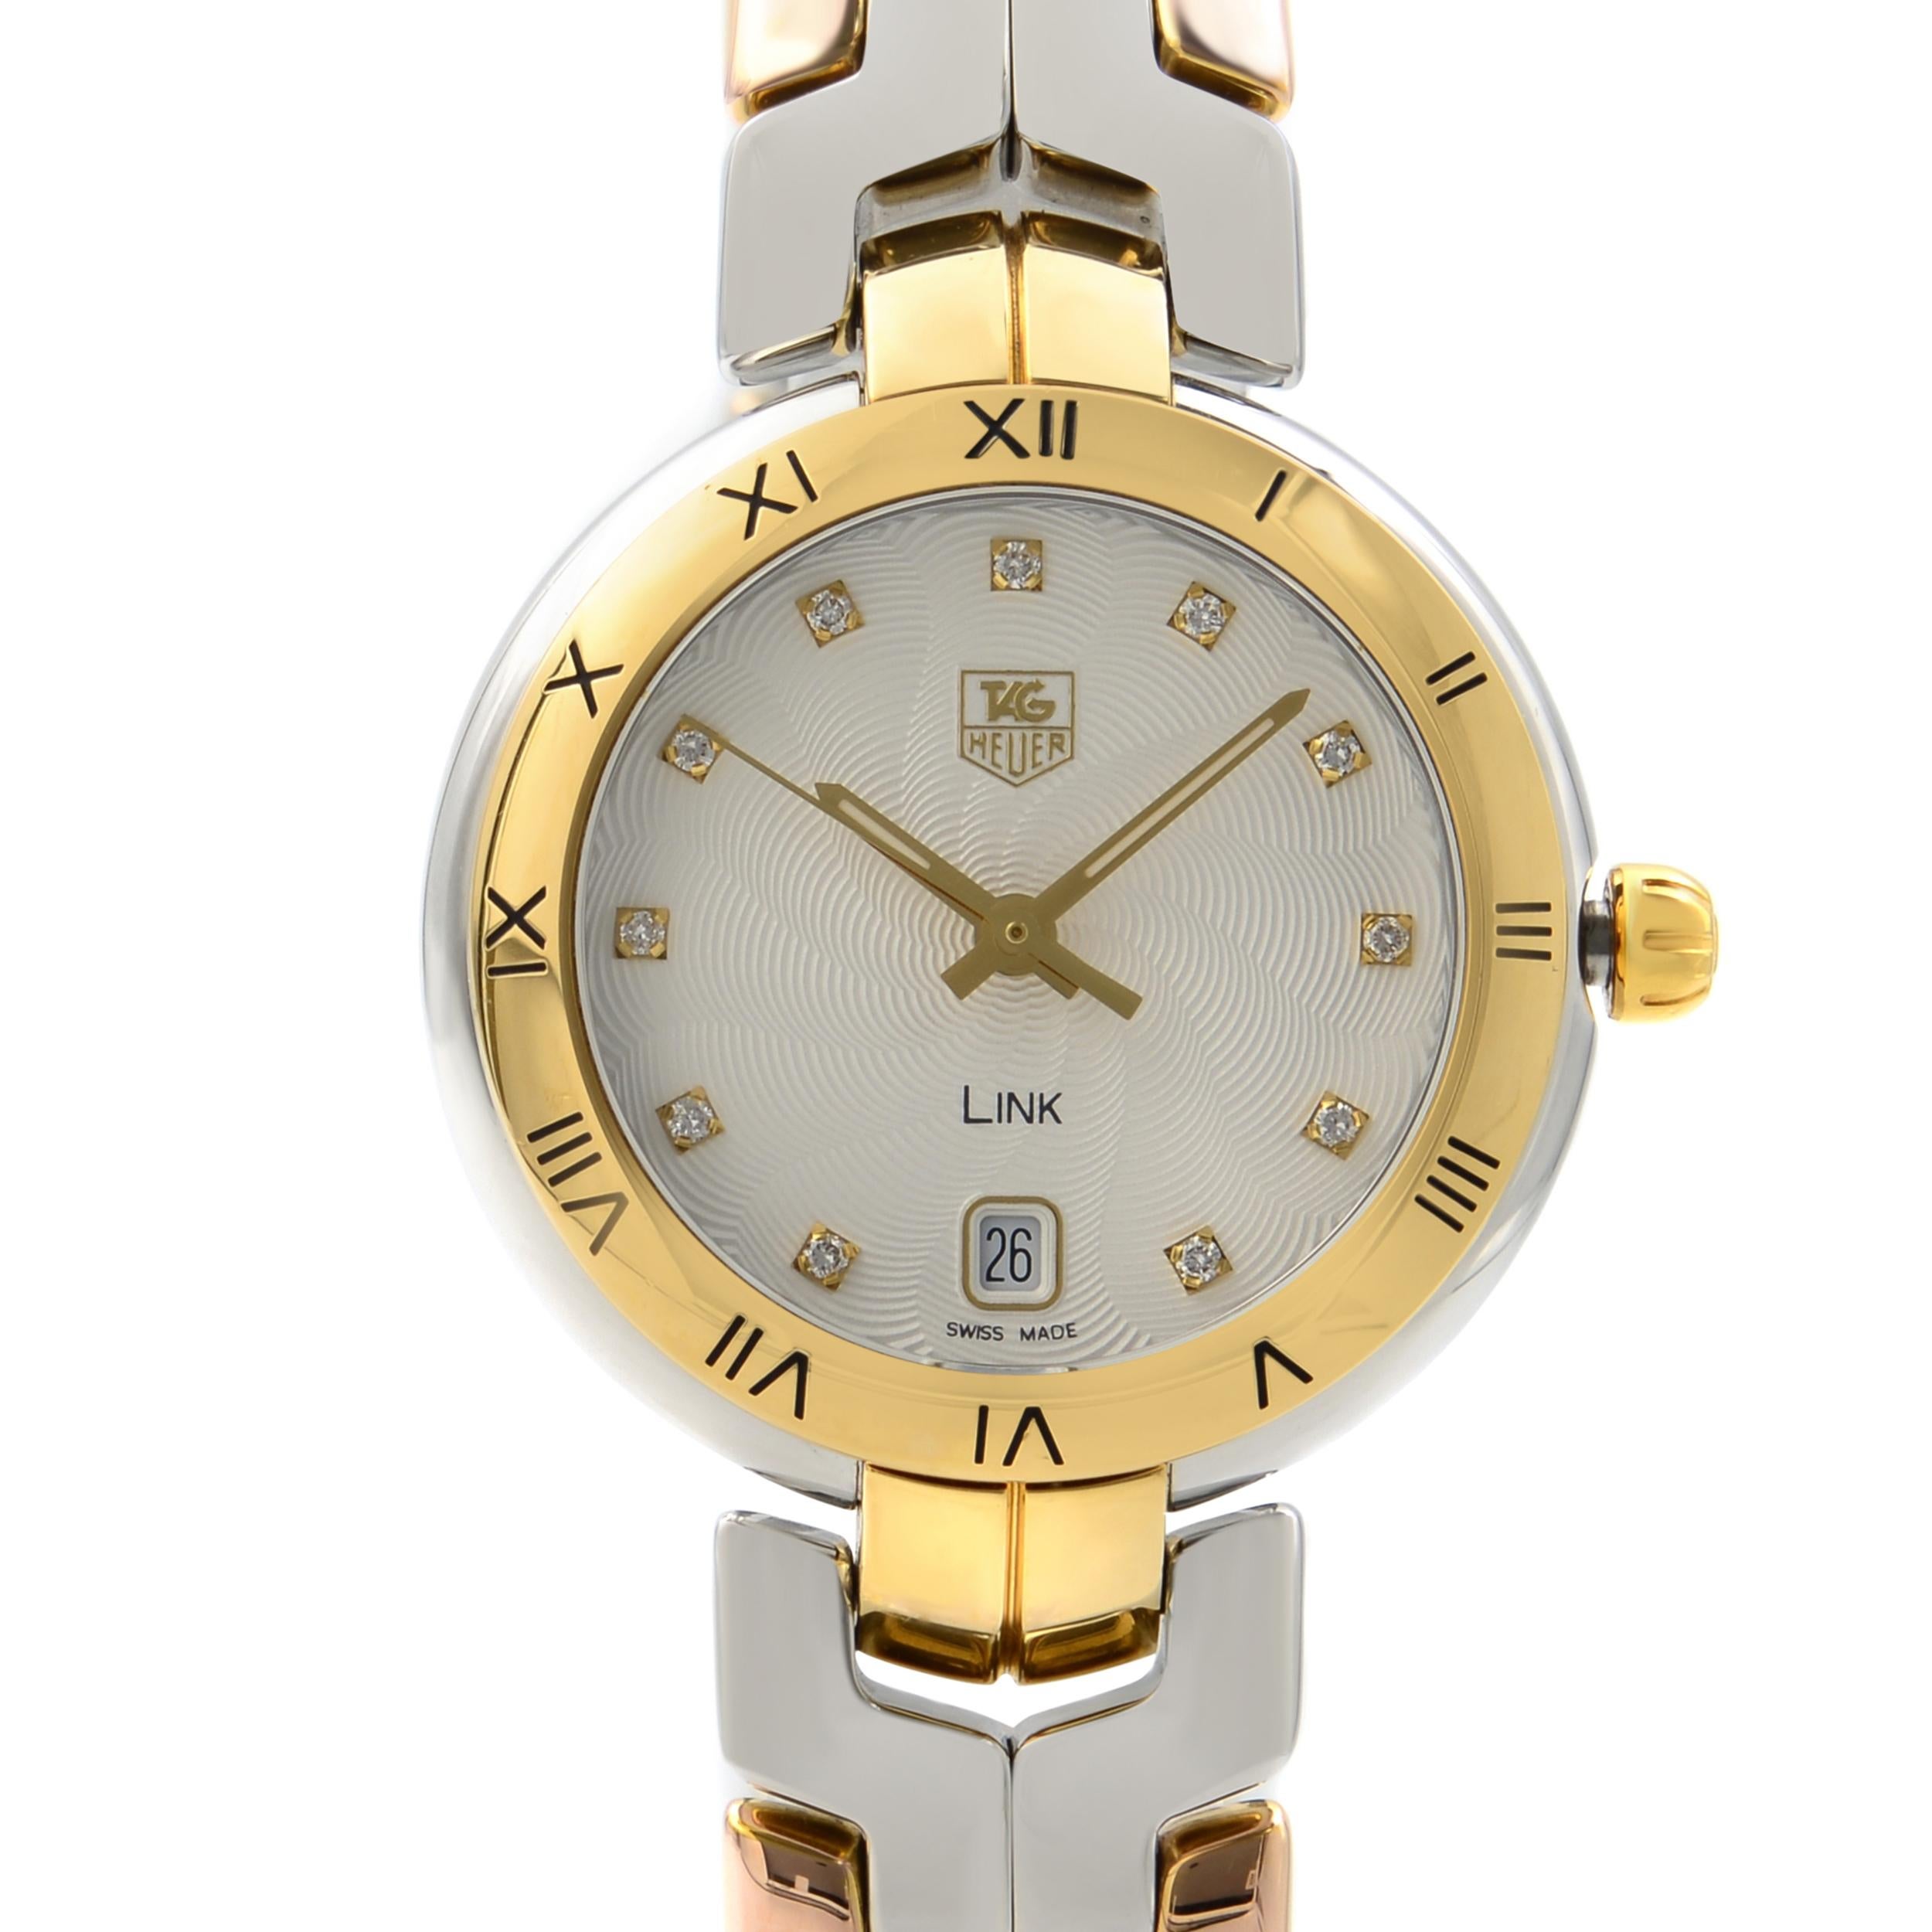 Pre-owned TAG Heuer Link 18K Stainless Steel Silver Dial Ladies Watch WAT1352.BB0962. 18K Yellow Gold and Stainless Steel Case with a 18k Yellow Gold and Stainless Steel Bracelet. Fixed 18k Yellow Gold Bezel. Silver Dial with Gold-Tone Hands and